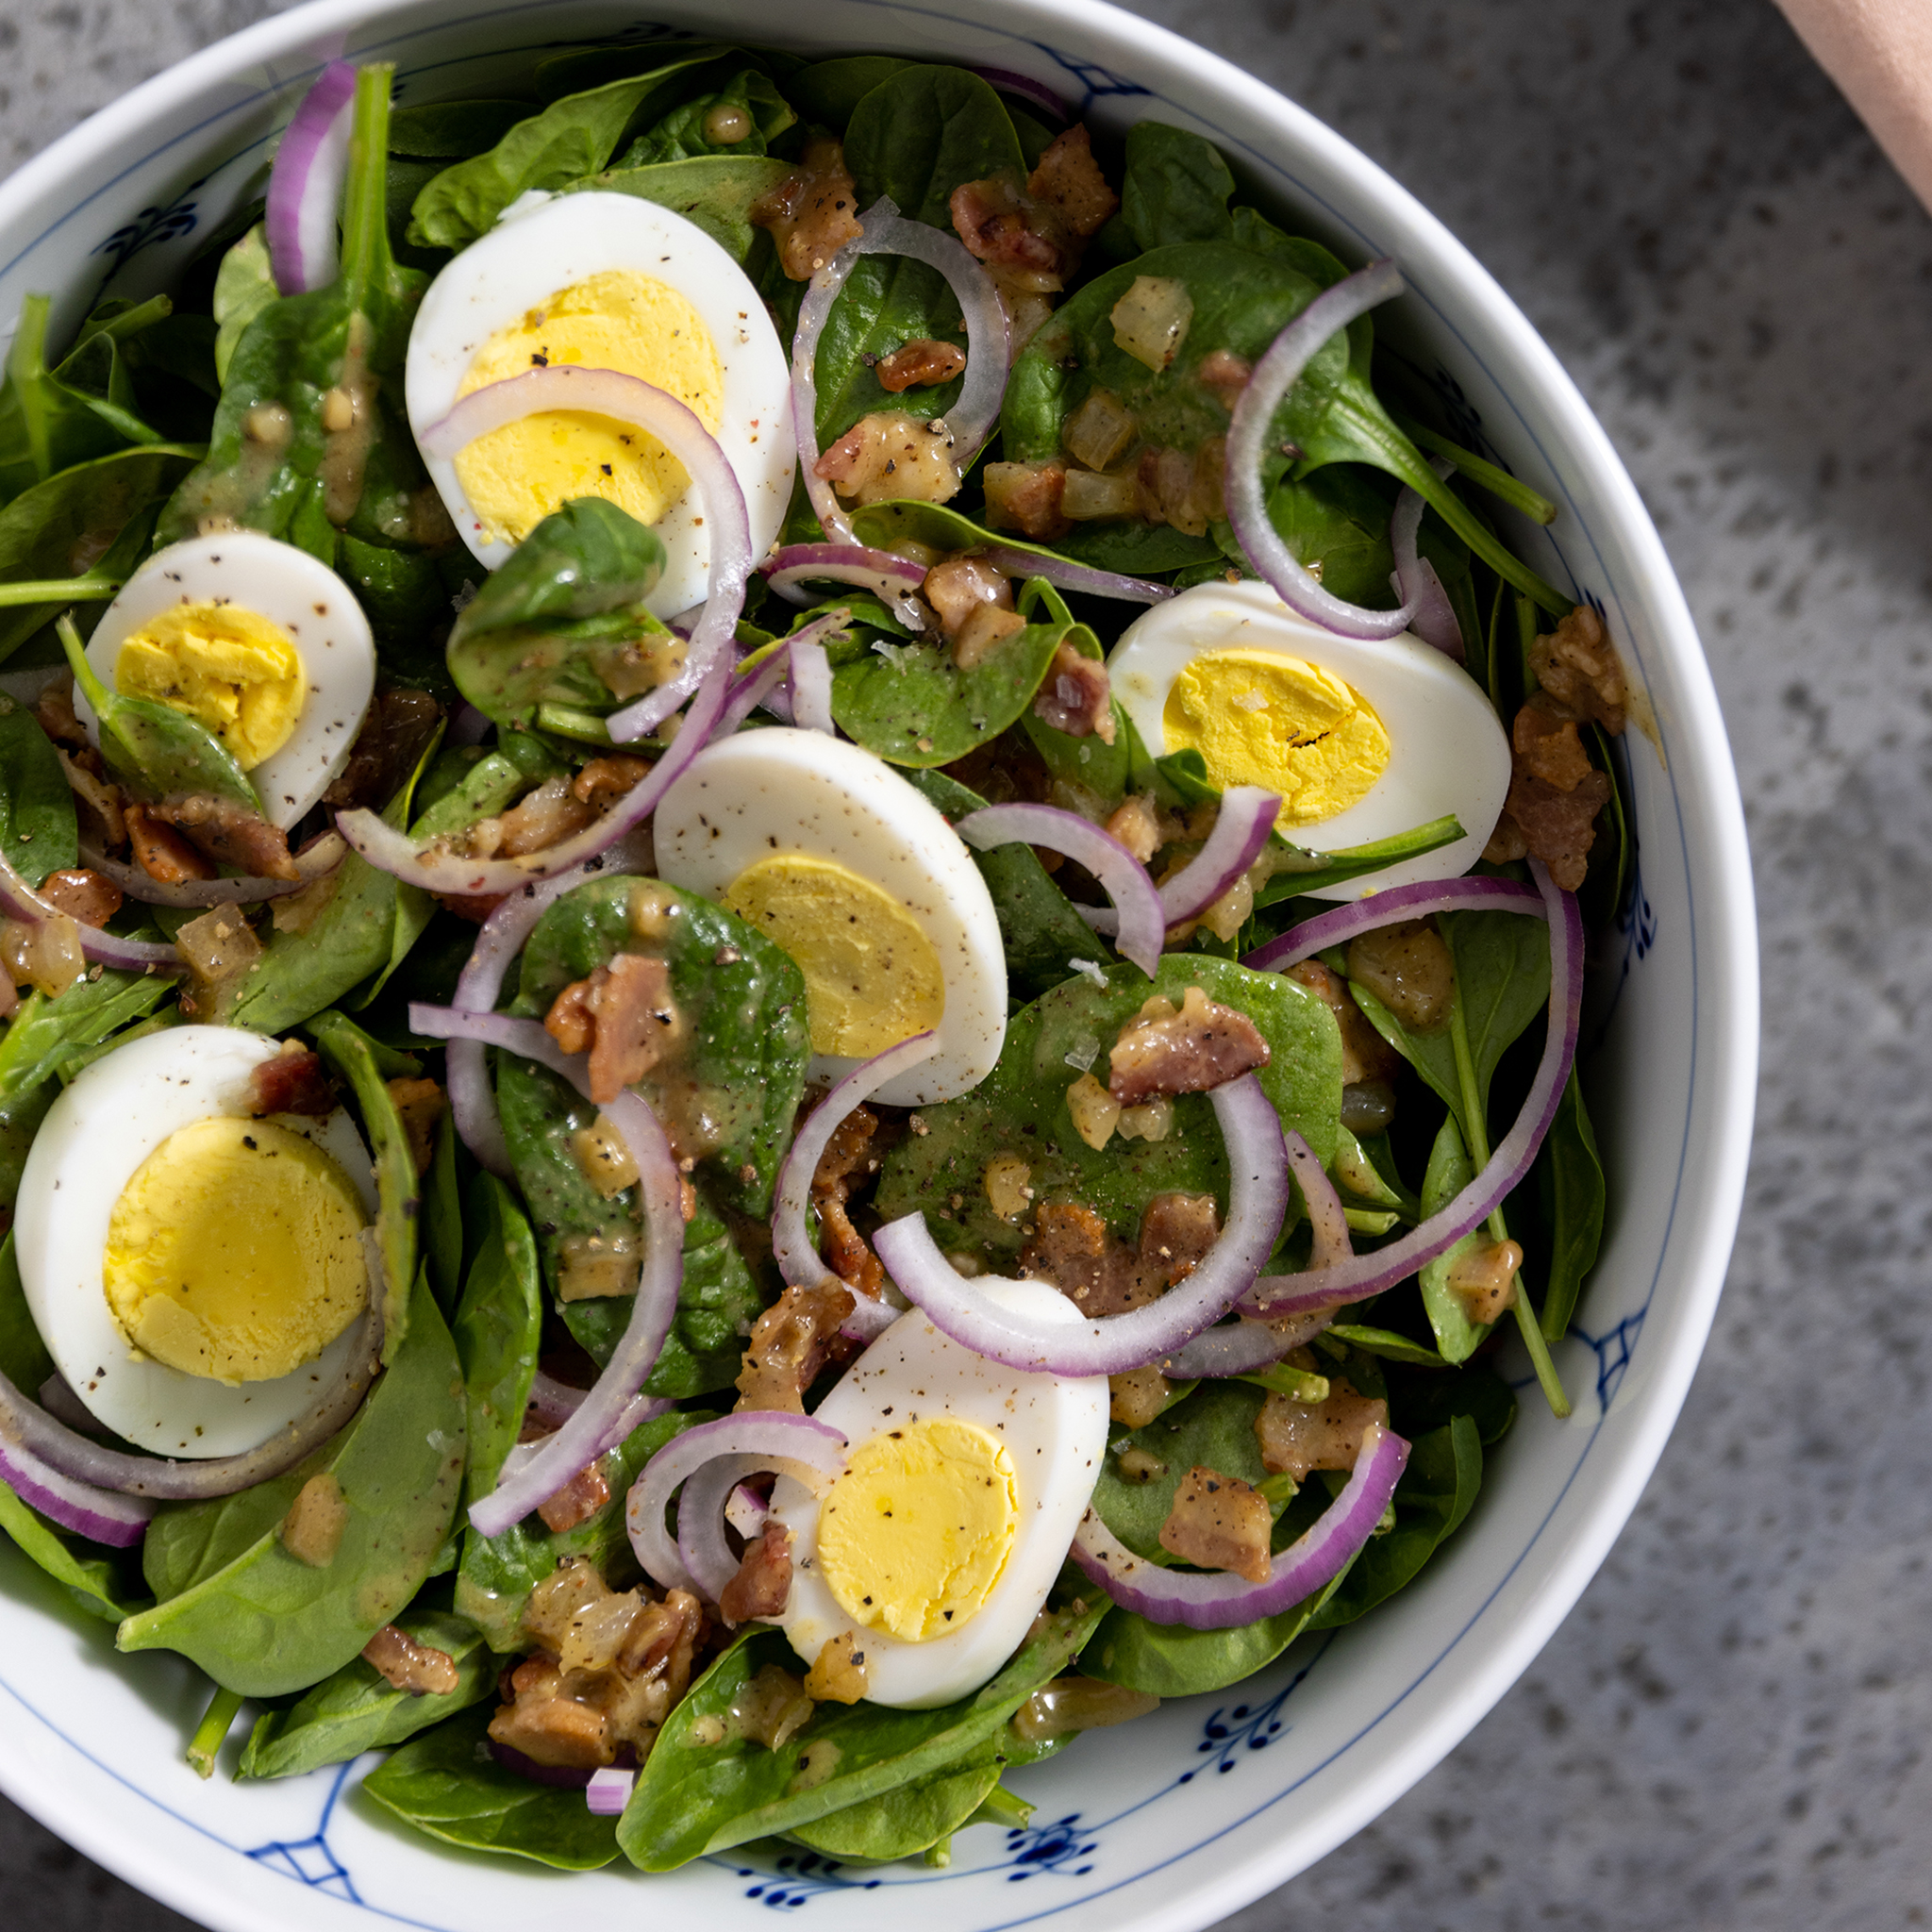 Joanna Gaines' Spinach Salad with Warm Bacon Vinaigrette